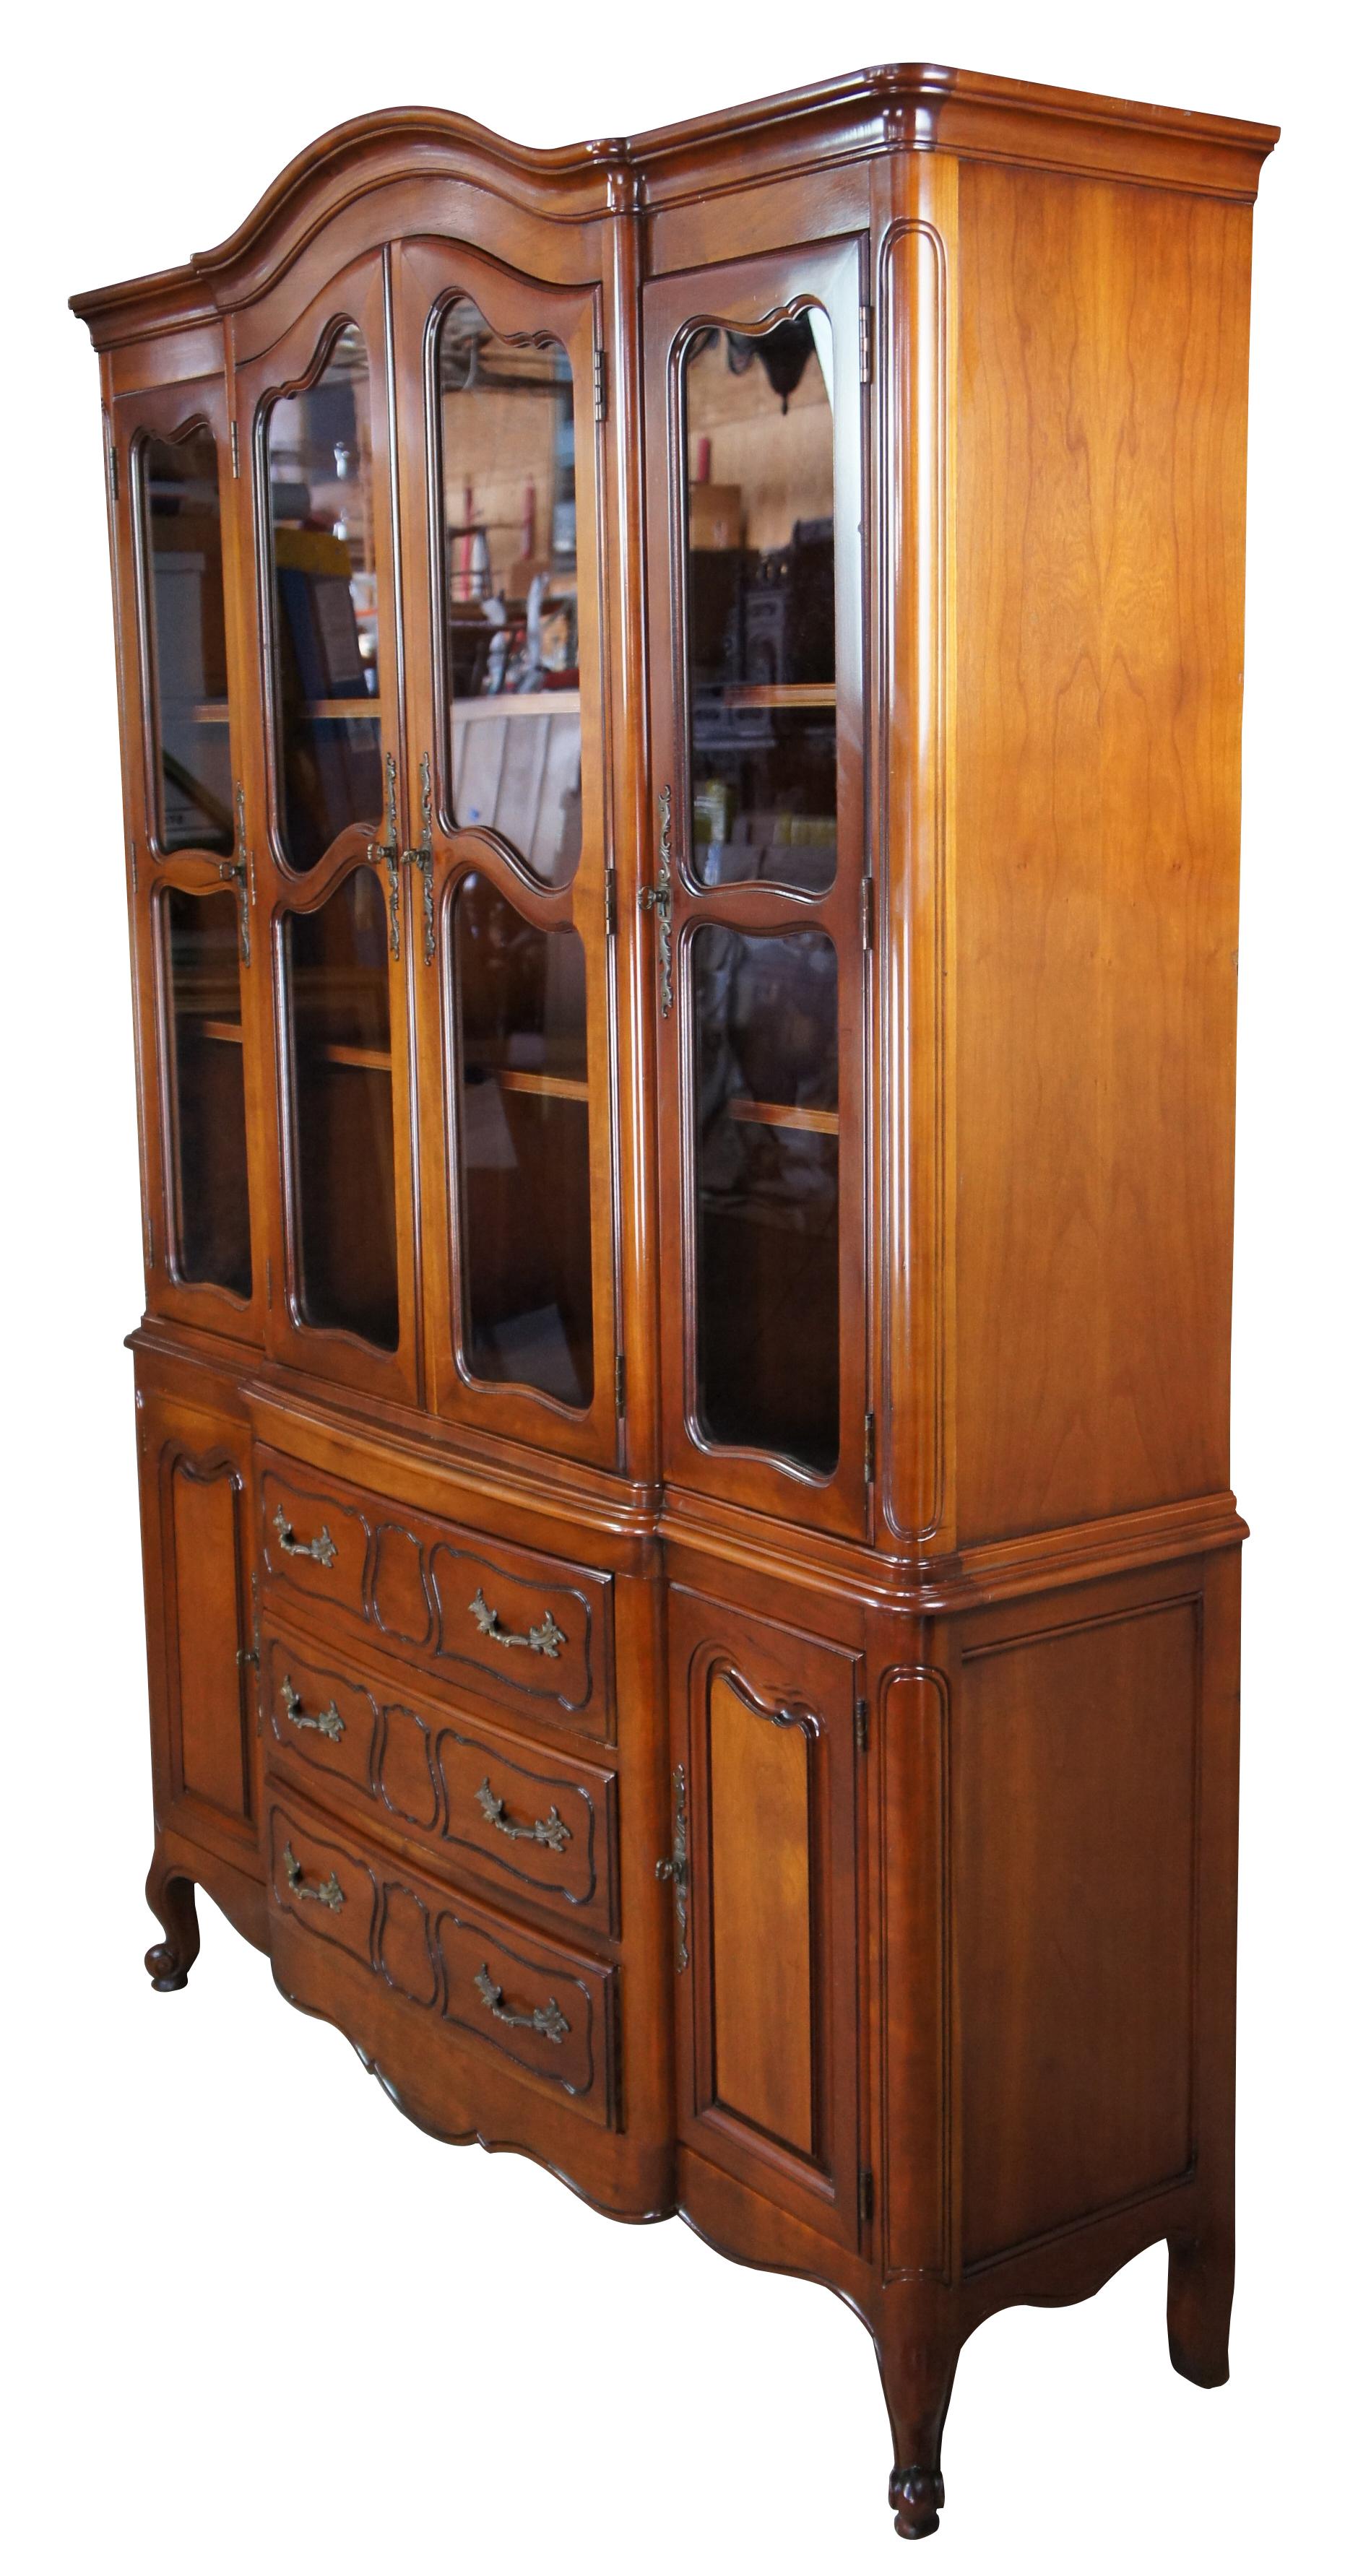 Vintage 1985 Drexel Heritage French Provincial china cabinet. Made of cherry featuring rectangular serpentine form with a breakfront, domed top, and cabriole legs. 3087, 1151. Size: 72